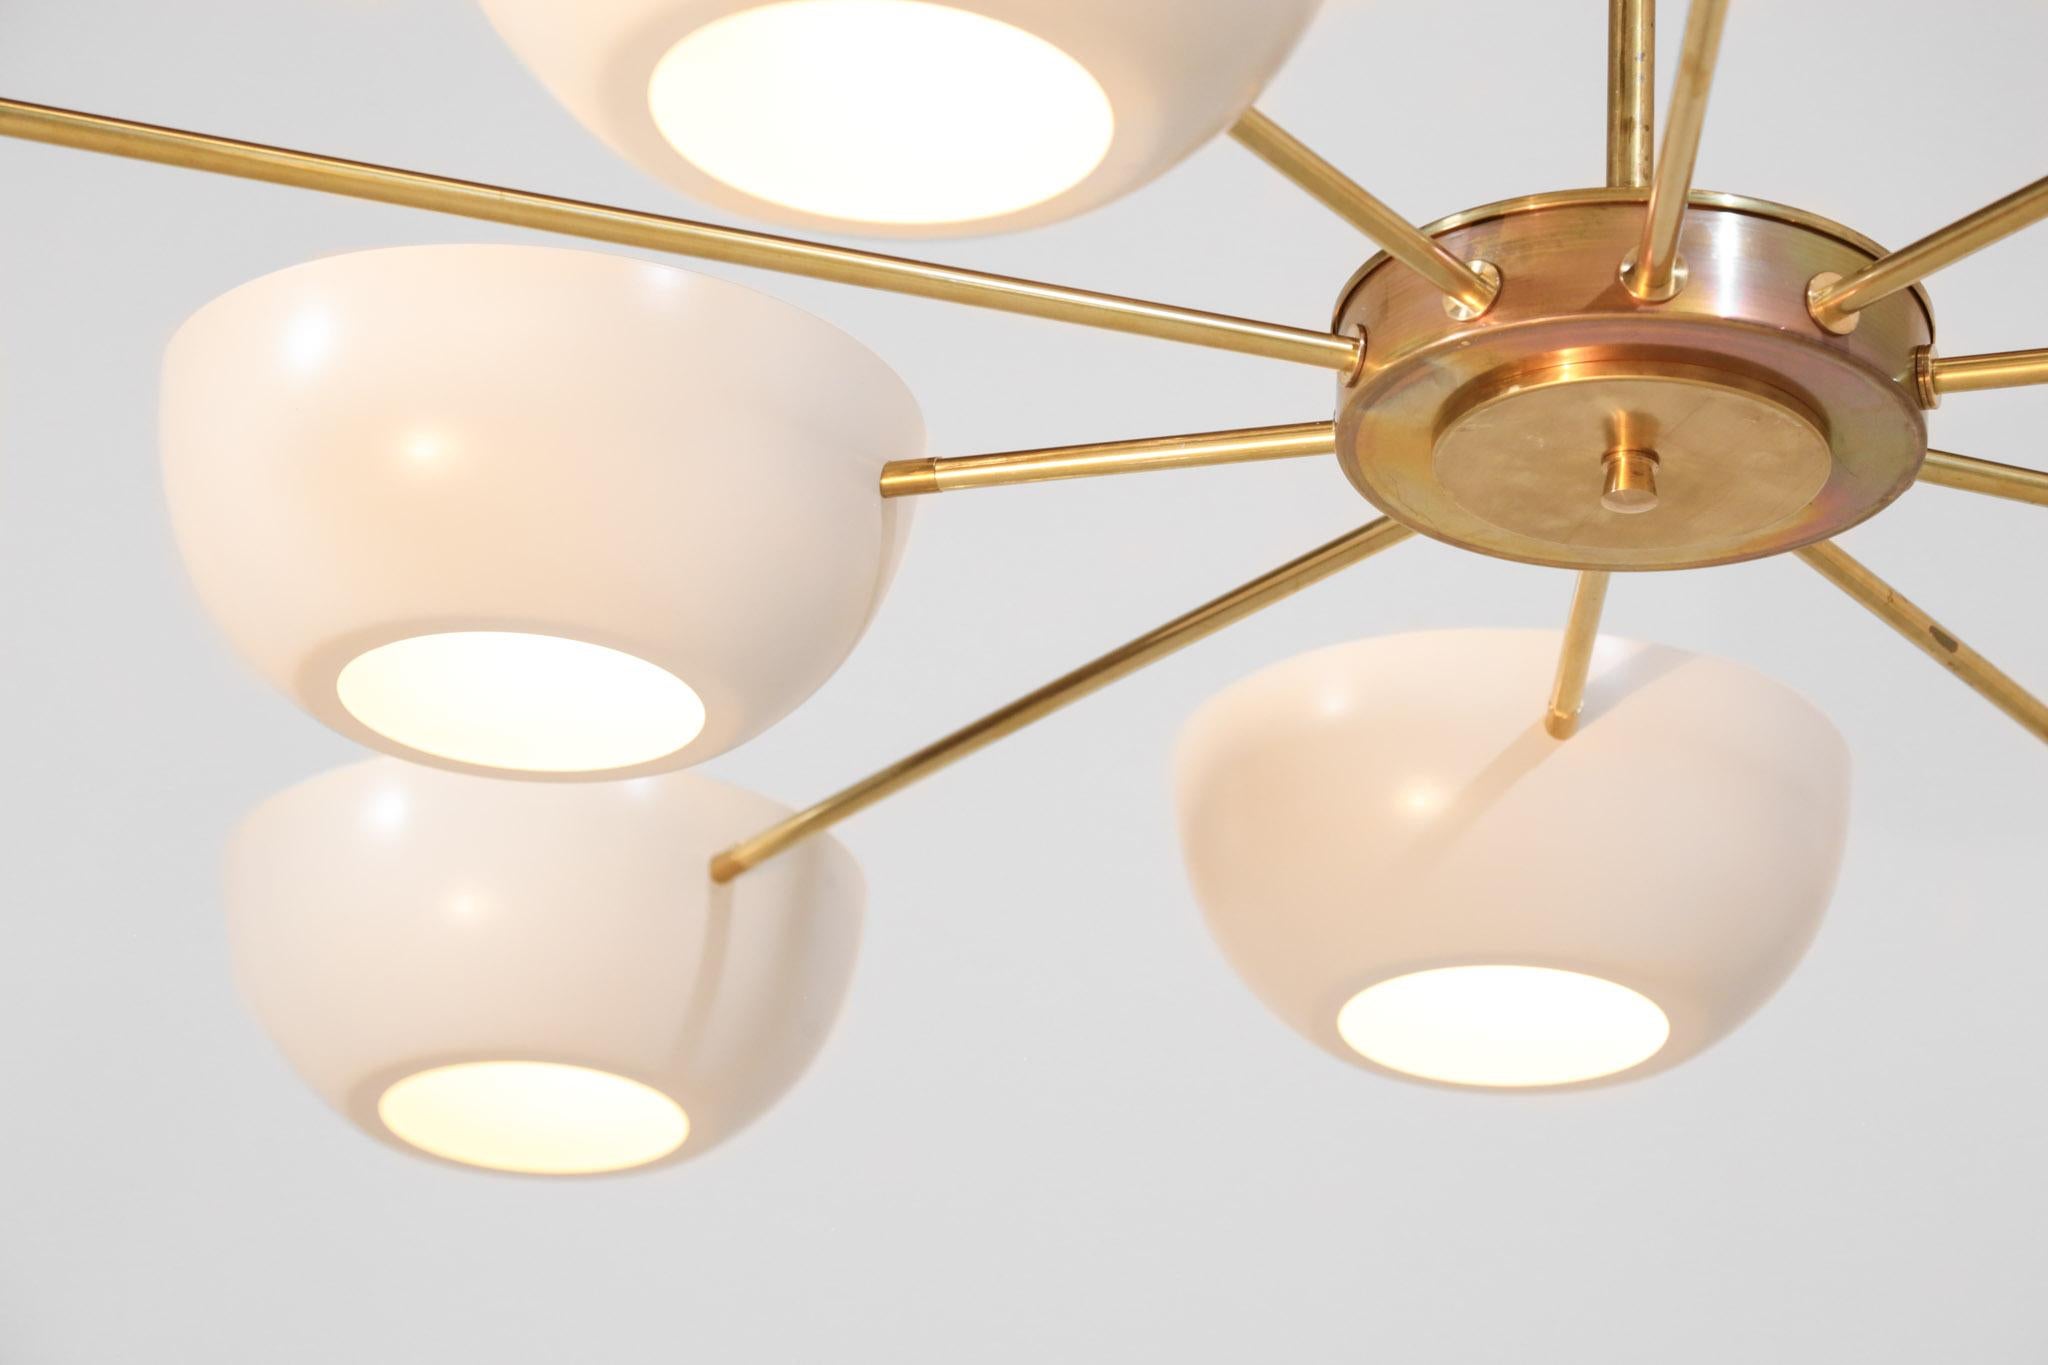 Contemporary Large Italian Modern Chandelier with 10 Arms in Gino Sarfatti Style 